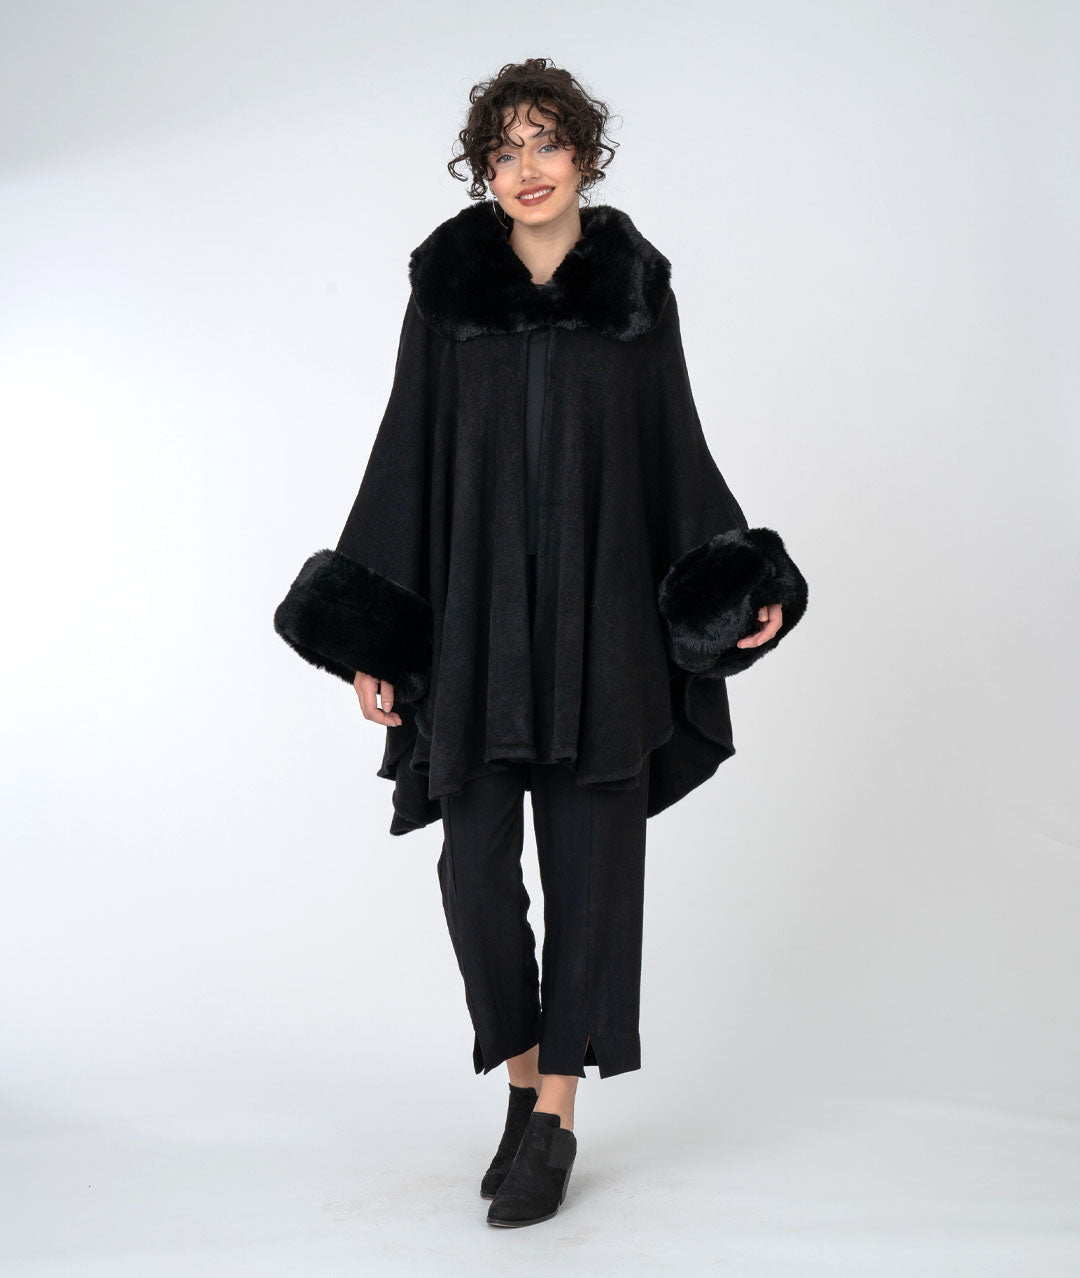 model is wearing all black with a black, fur trimmed cape over top